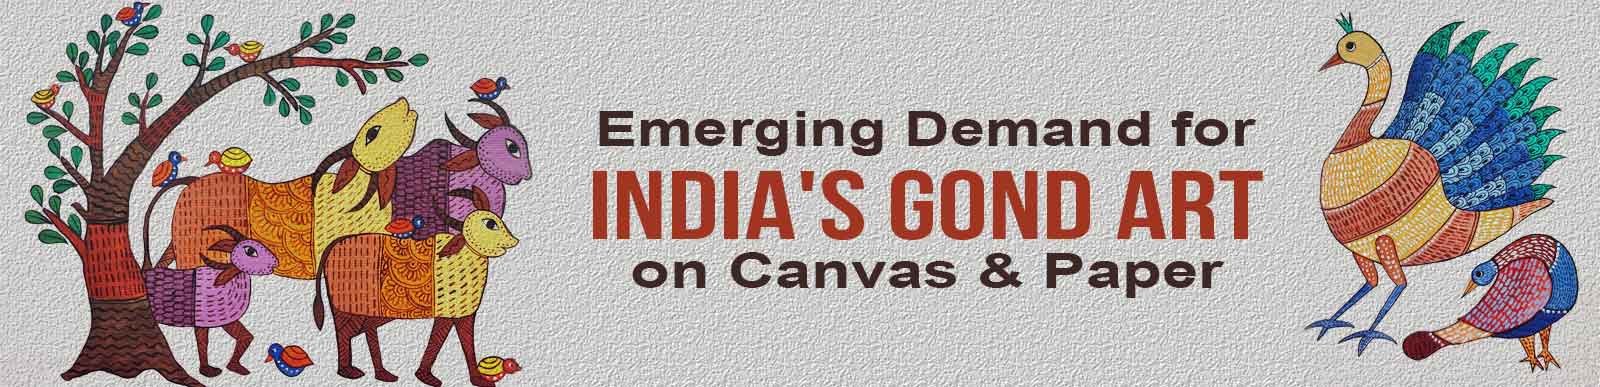 Emerging Demand for Indias Gond Art on Canvas and Paper